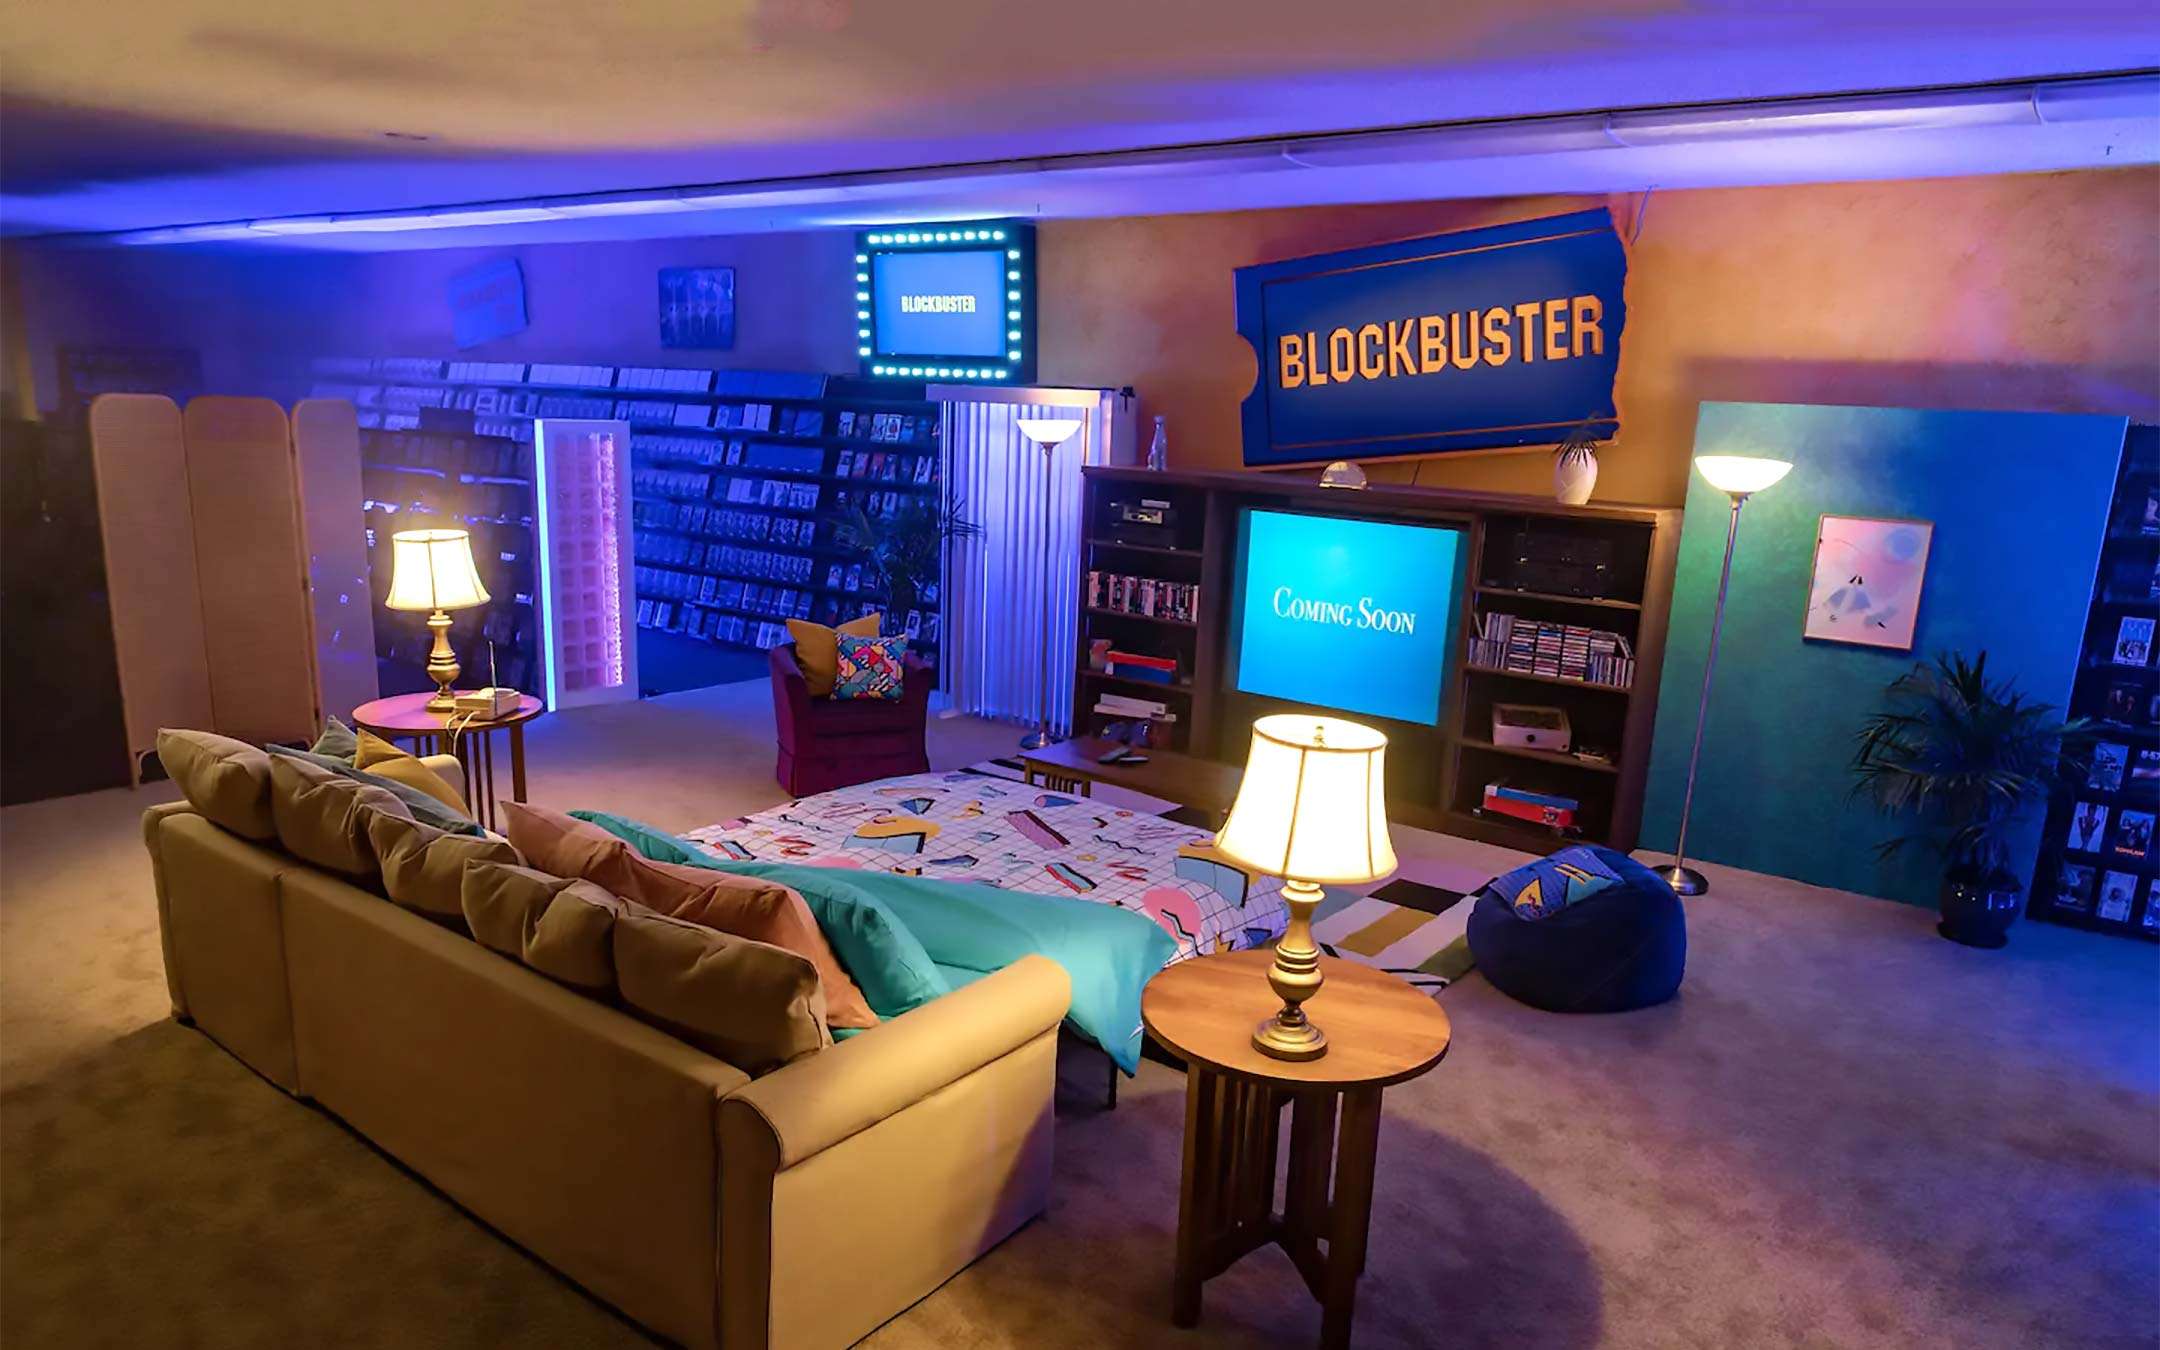 Sleeping in the latest Blockbuster, on Airbnb